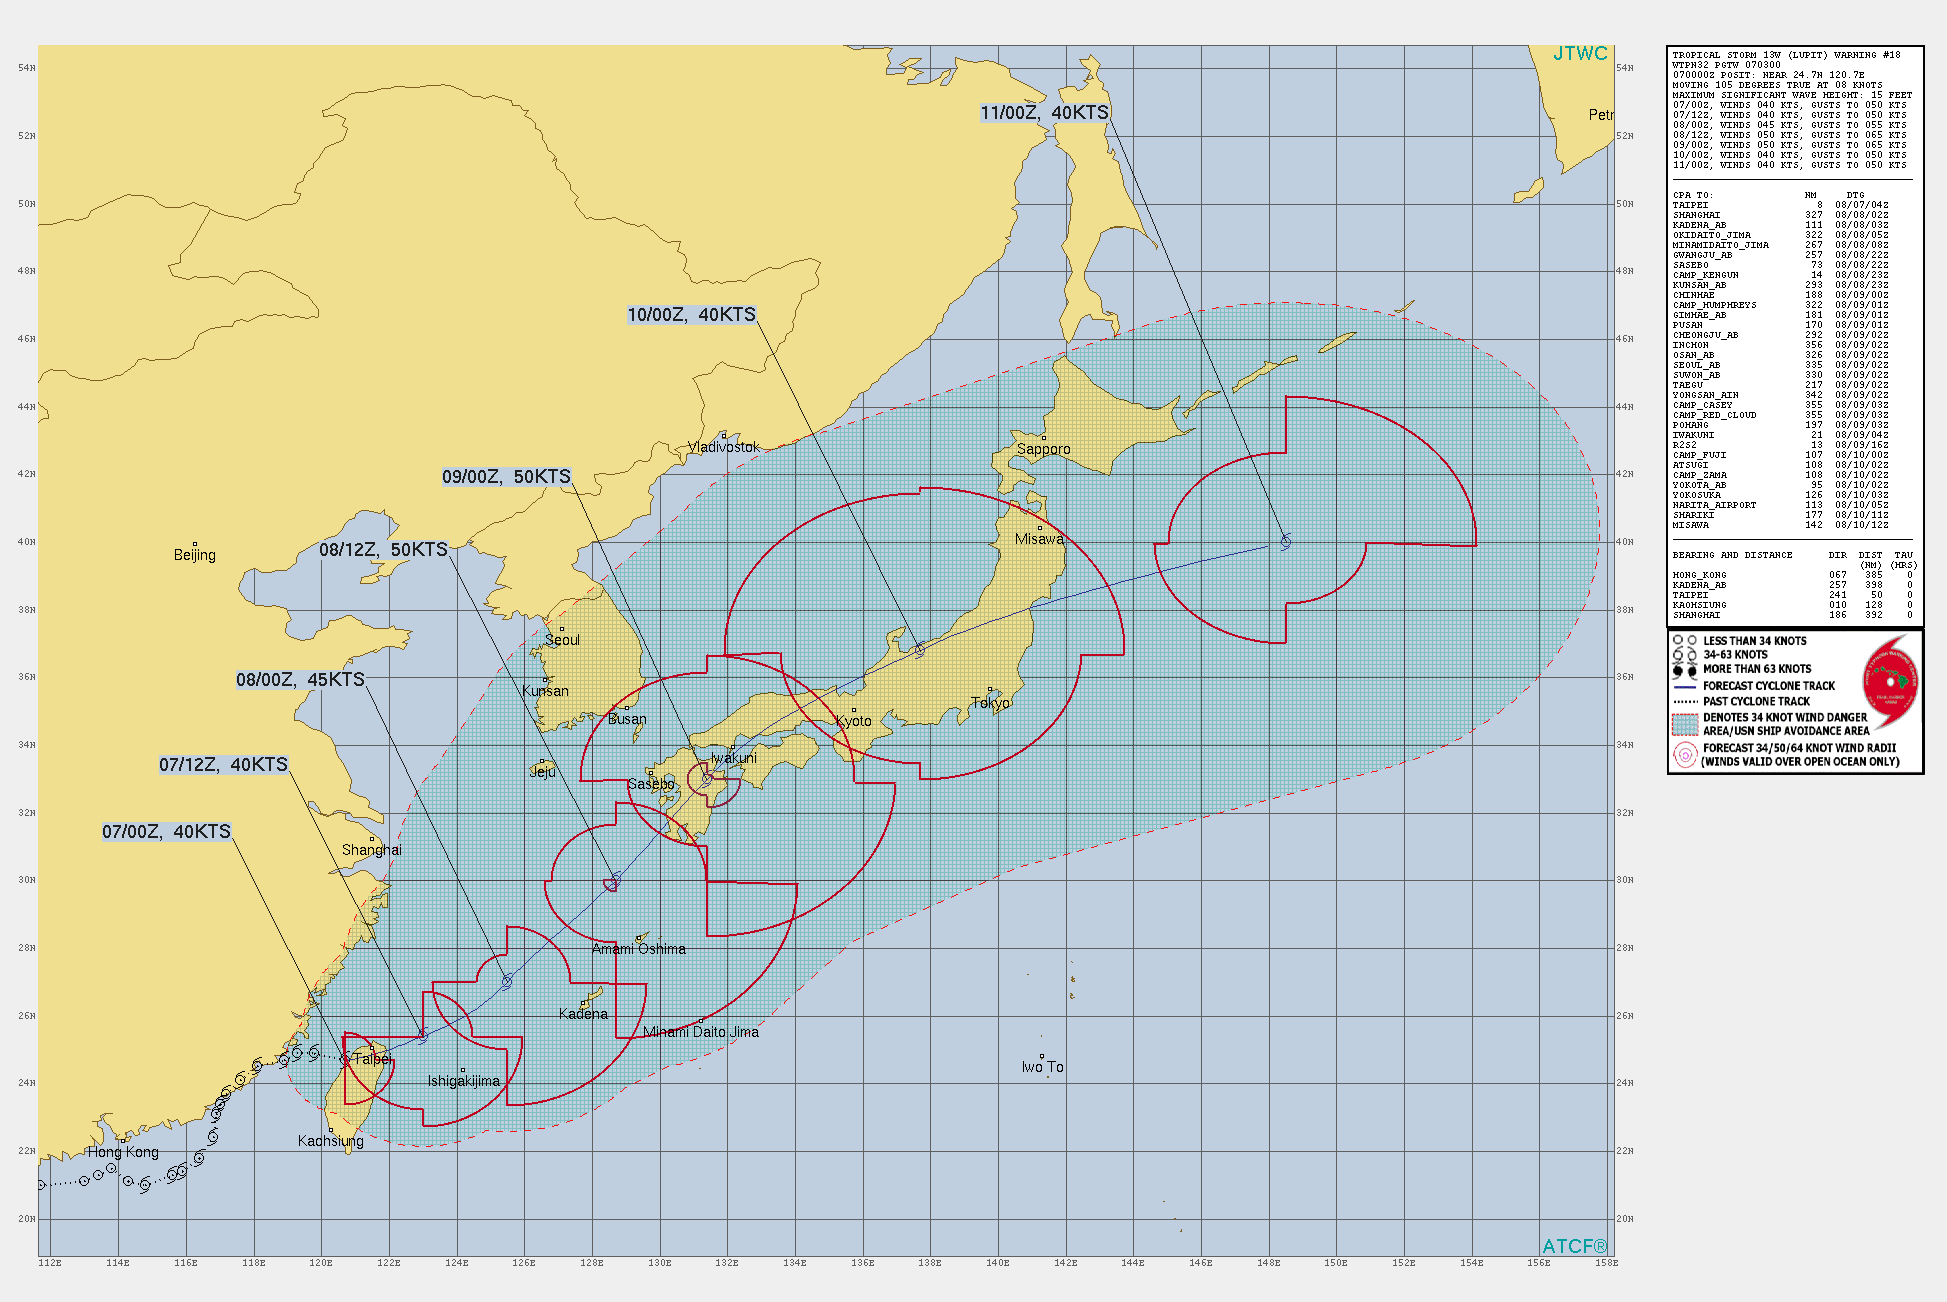 TS 13W(LUPIT). WARNING 18 ISSUED AT 07/03UTC.THERE ARE NO SIGNIFICANT CHANGES TO THE FORECAST FROM THE PREVIOUS WARNING.  FORECAST DISCUSSION: TROPICAL STORM 13W (LUPIT) TOOK A TEMPORARY JOG TOWARD THE SOUTHEAST BUT HAS RESUMED AN EAST-NORTHEASTWARD TRAJECTORY AS IT MAKES LANDFALL OVER NORTHERN TAIWAN. THE SYSTEM IS FORECAST TO HEAVILY INTERACT WITH THE COMPLEX TERRAIN OF TAIWAN OVER THE NEXT 6 TO 12 HOURS, SO THERE IS LOW CONFIDENCE IN THE SHORT-TERM TRACK AND INTENSITY FORECASTS. THE SOUTHWESTERLY MONSOON  FLOW IS SPLIT TO THE WEST AND EAST OF TAIWAN, WITH THE LATTER REGION  CONTINUING TO EXHIBIT SOME EVIDENCE OF LEE SURFACE TROUGH FORMATION  TO THE NORTHEAST OF TAIWAN, WHICH COULD IMPACT THE TRACK AND  REDEVELOPMENT OF THE LLCC ONCE IT EXITS BACK OVER OPEN WATER EAST- NORTHEAST OF TAIPEI. BETWEEN 12H AND 36H, LUPIT IS FORECAST TO  TRACK NORTHEASTWARD TOWARD KYUSHU AND WILL BE LOCATED TO THE  NORTHWEST OF OKINAWA, JAPAN AROUND 24-30H. THE TIMING AND  POSITION OF THE TRACK WILL DEPEND UPON THE REORGANIZATION OF THE  LLCC ONCE THE SYSTEM CROSSES THE LONGITUDE OF THE TAIWAN CENTRAL  MOUNTAIN RANGE. INTENSIFICATION TO A PEAK INTENSITY OF AROUND 50  KNOTS IS EXPECTED PRIOR TO LANDFALL IN KYUSHU. EXTRATROPICAL  TRANSITION SHOULD BEGIN AS LUPIT CROSSES HONSHU, WITH TRANSITION  COMPLETE BY 96H UPON EXITING JAPAN.